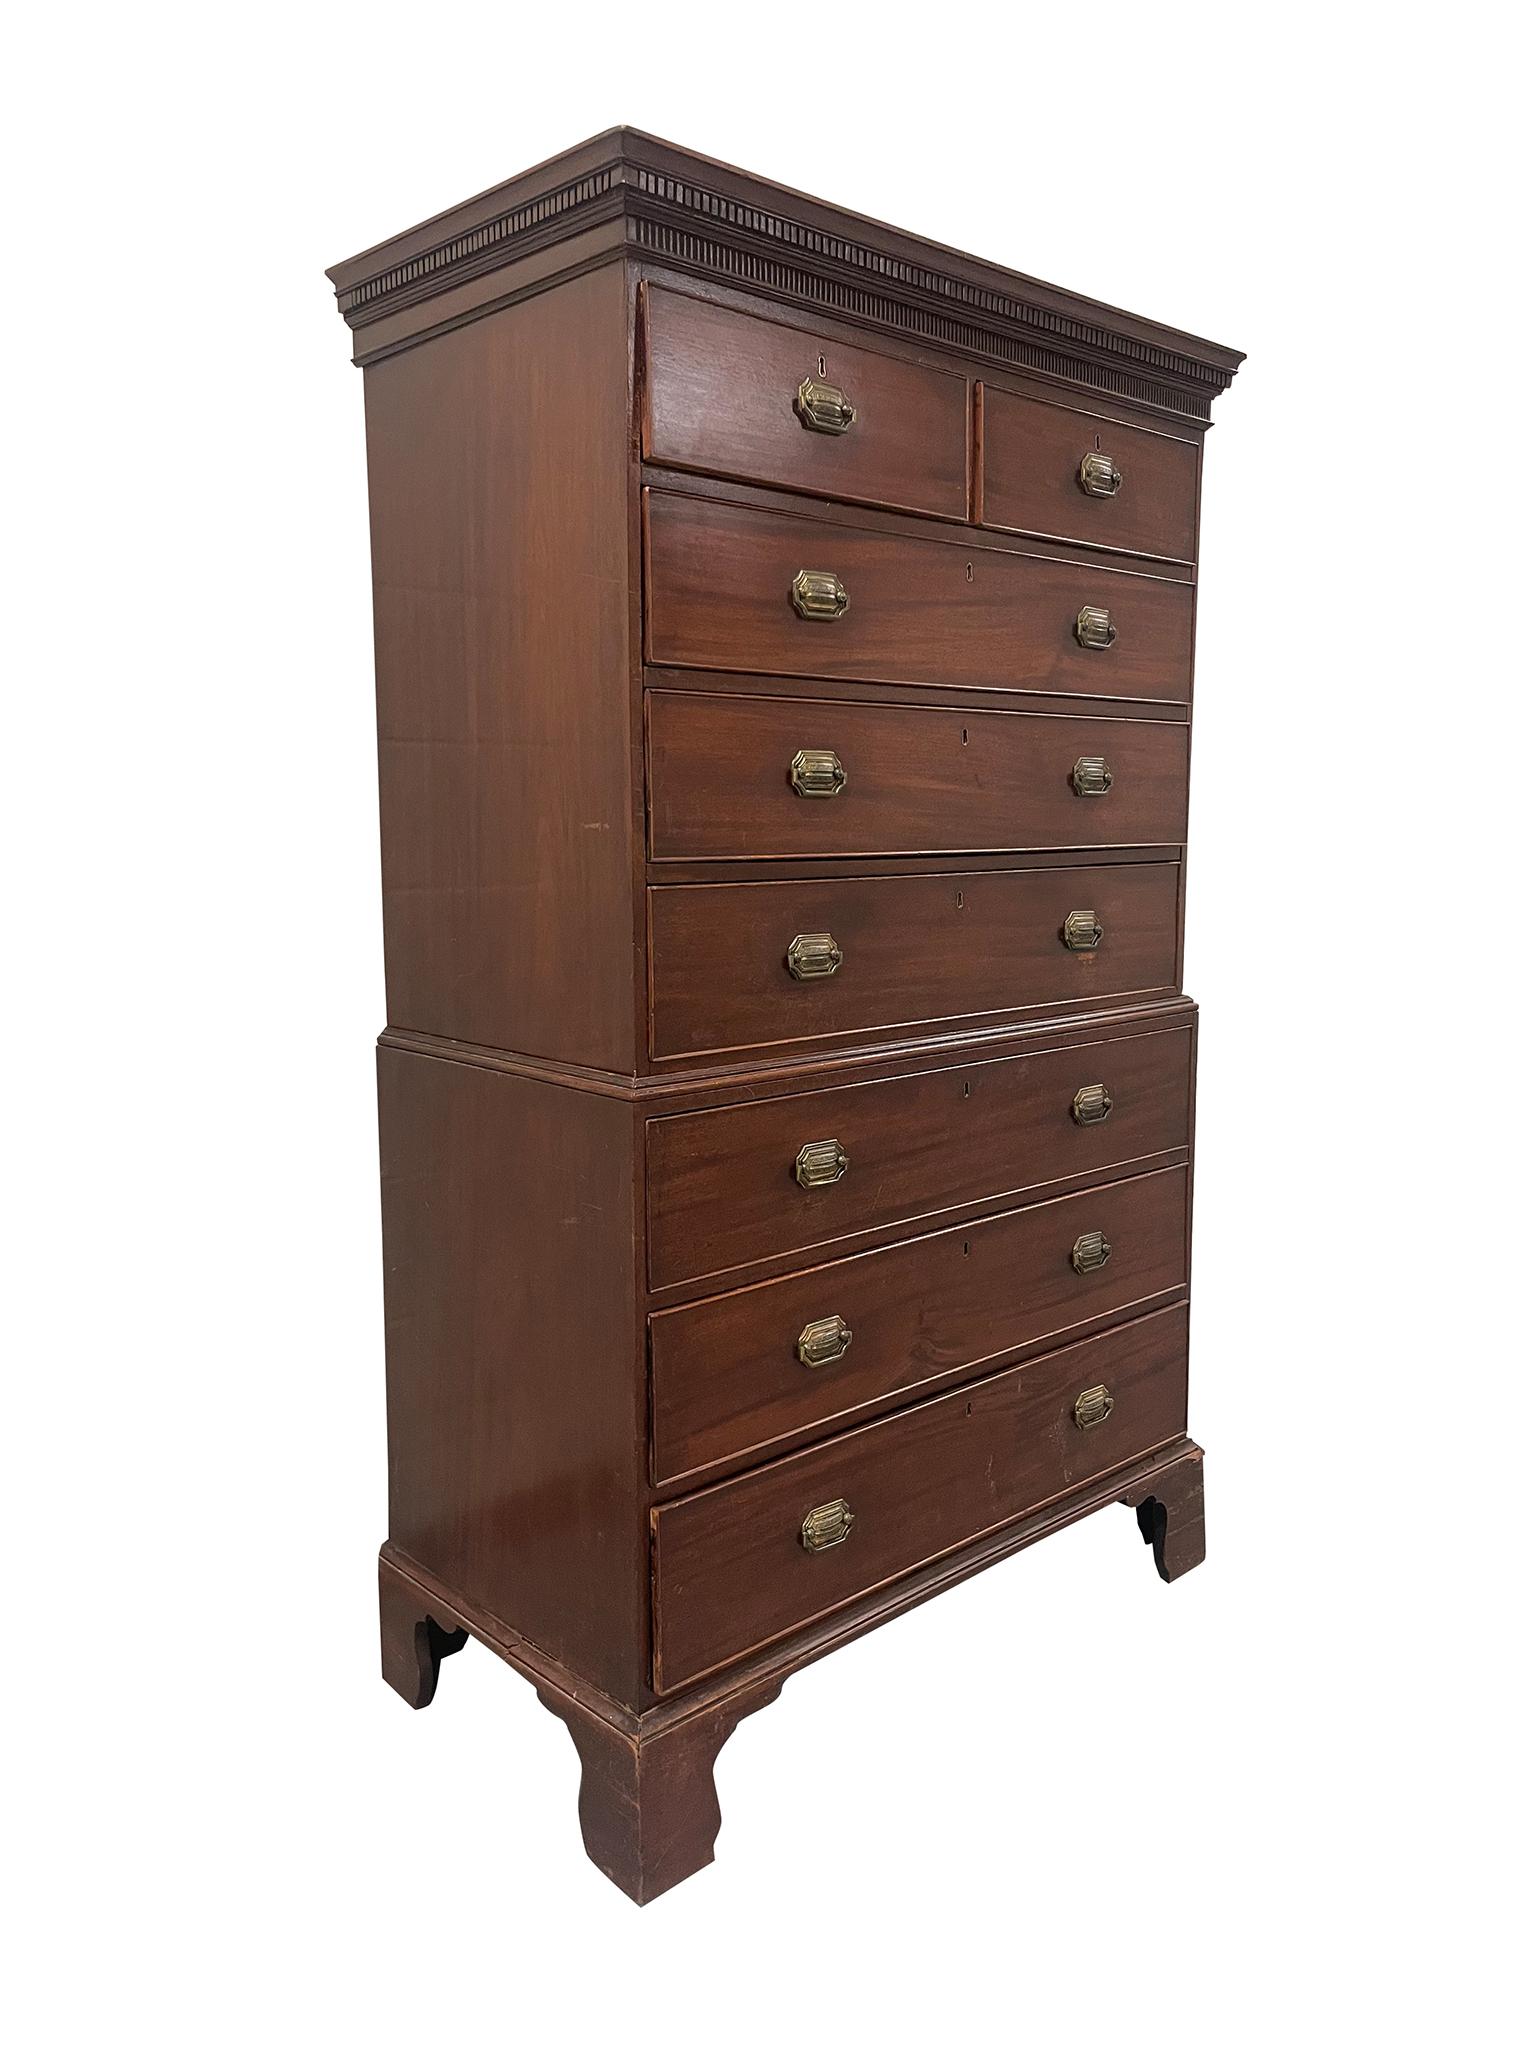 Handsome Antique Mahogany Two-Piece Chest of Drawers, attributed to be from the George III period. Crafted in solid, high quality mahogany, the chest on chest features 5 top drawers and three separated bottom drawers. Designed with bracket feet,